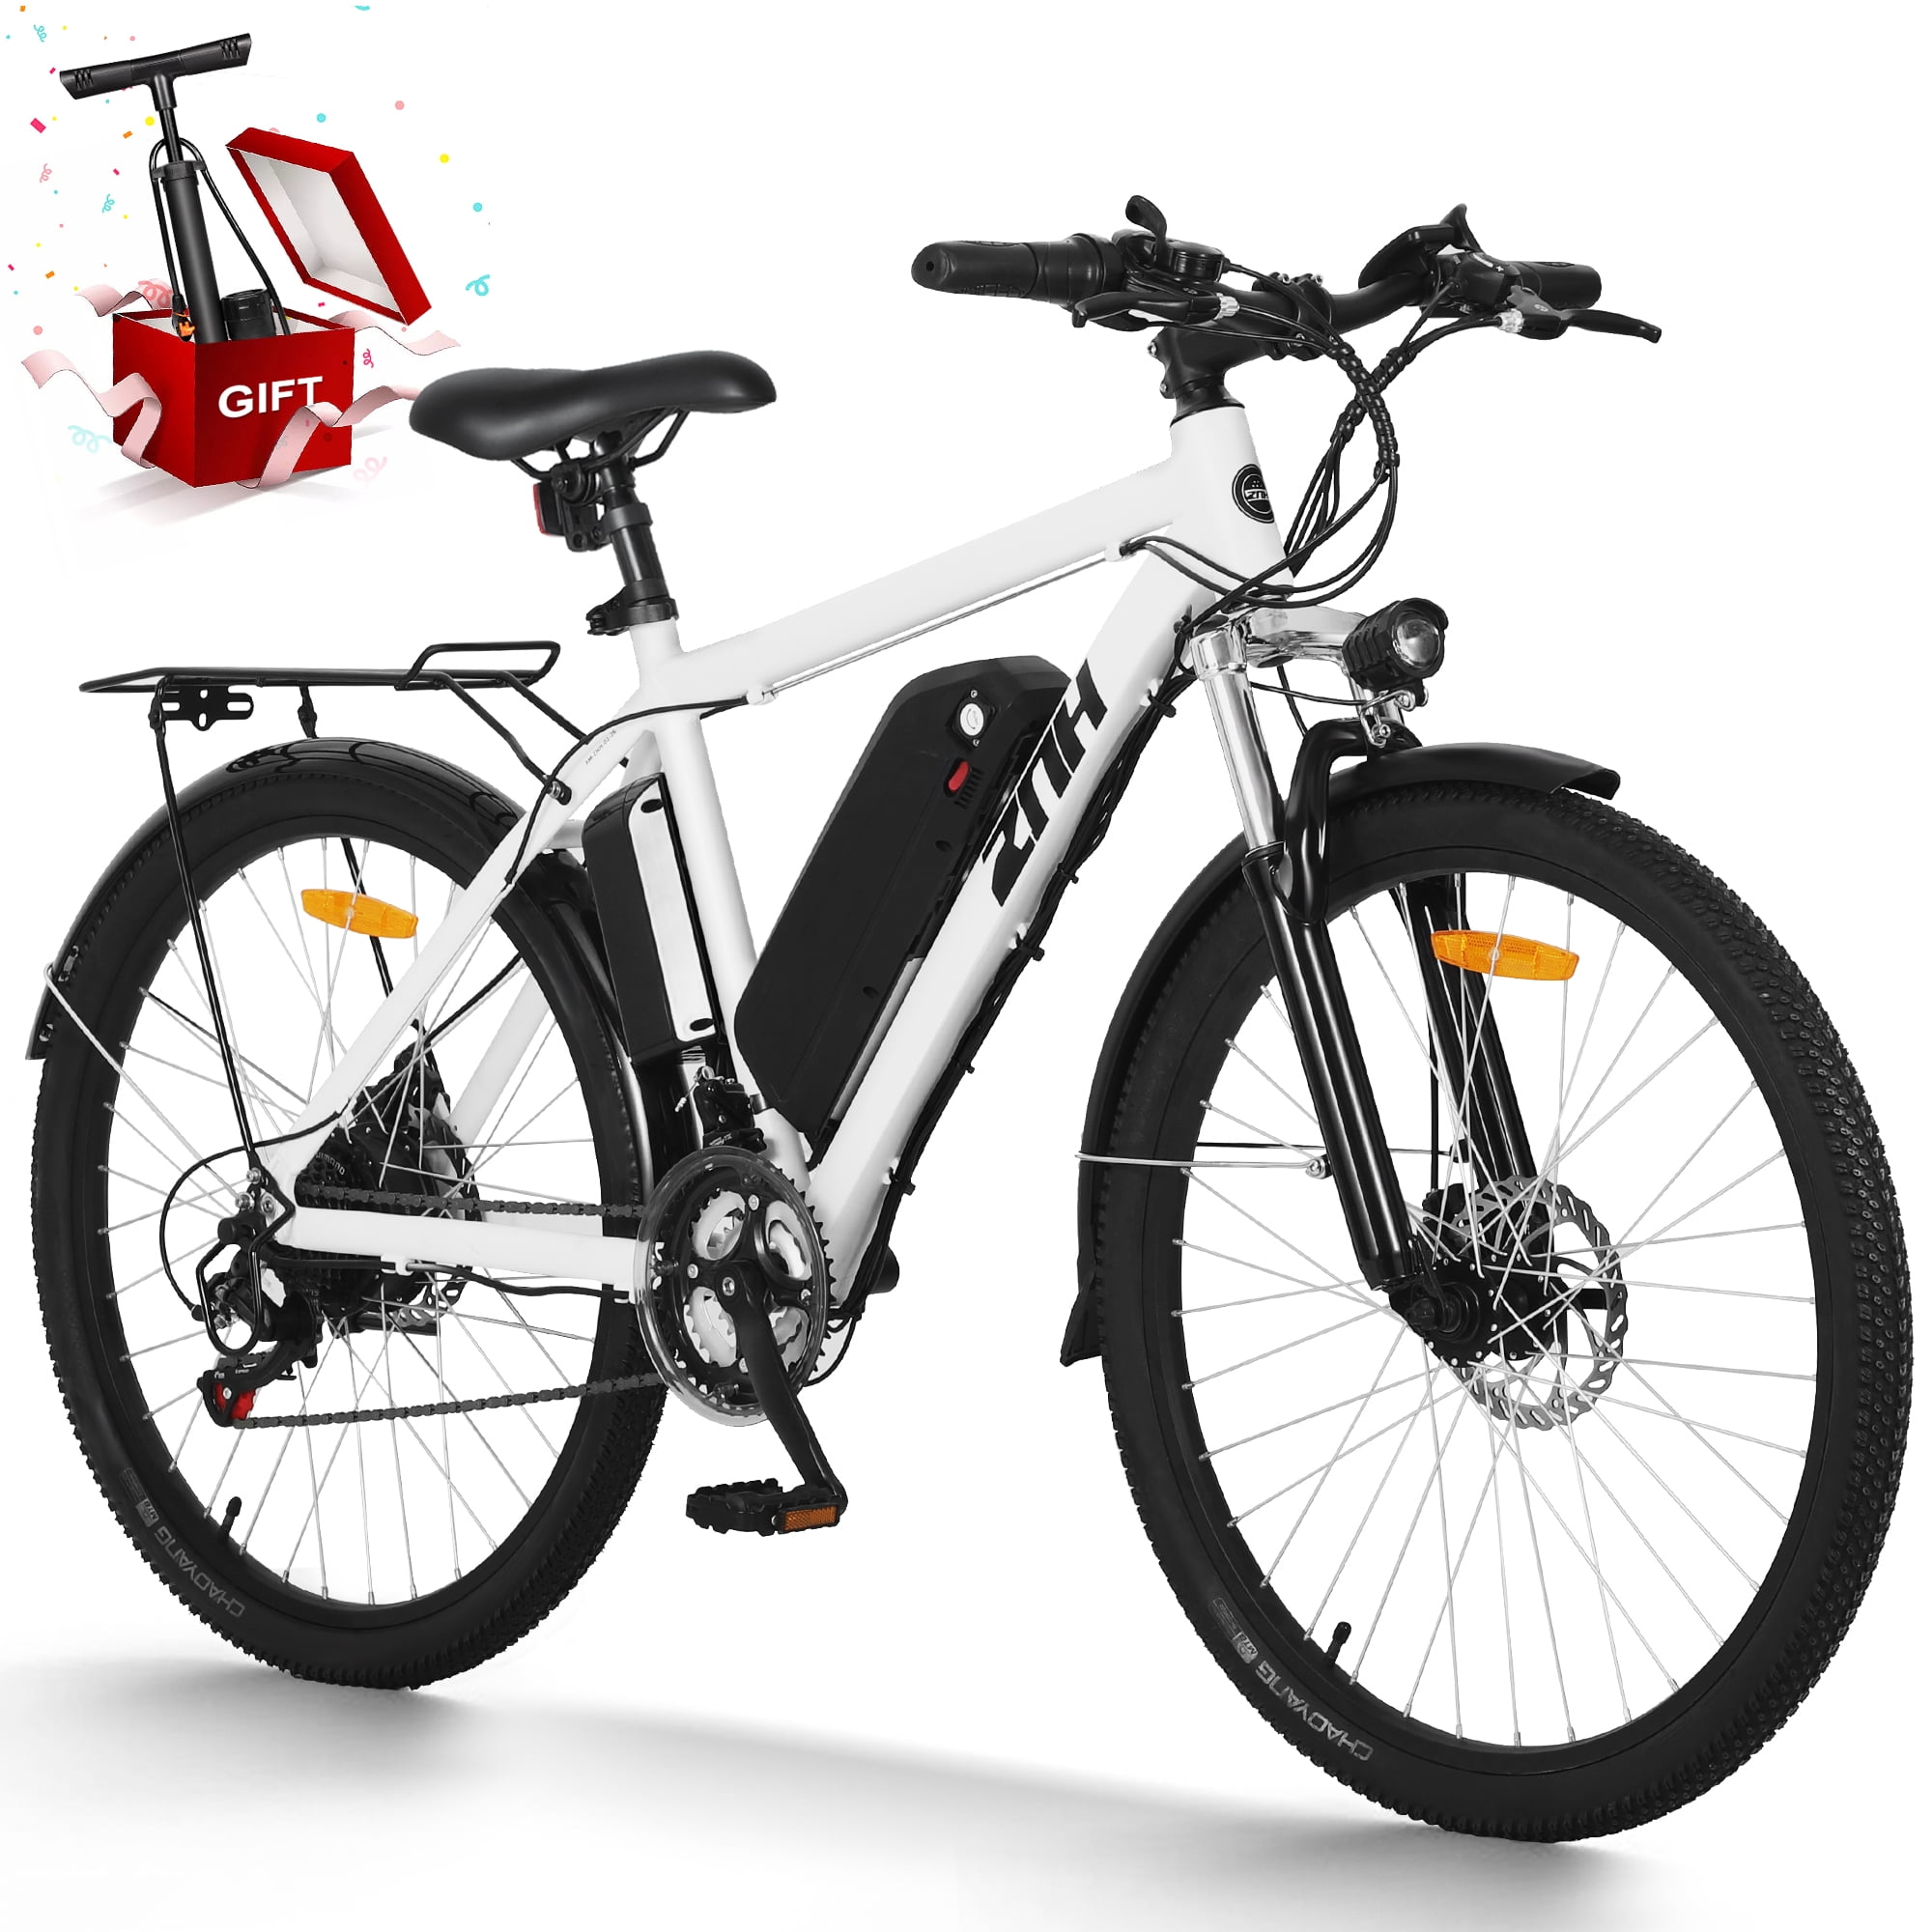 ZNH Electric Bike, Electric Mountain Bike 26" 350W Commuter Bicycle, Adult Ebike with Removable 36V/10AH Battery for Men Women, Shimano 21-Speed Gears, White